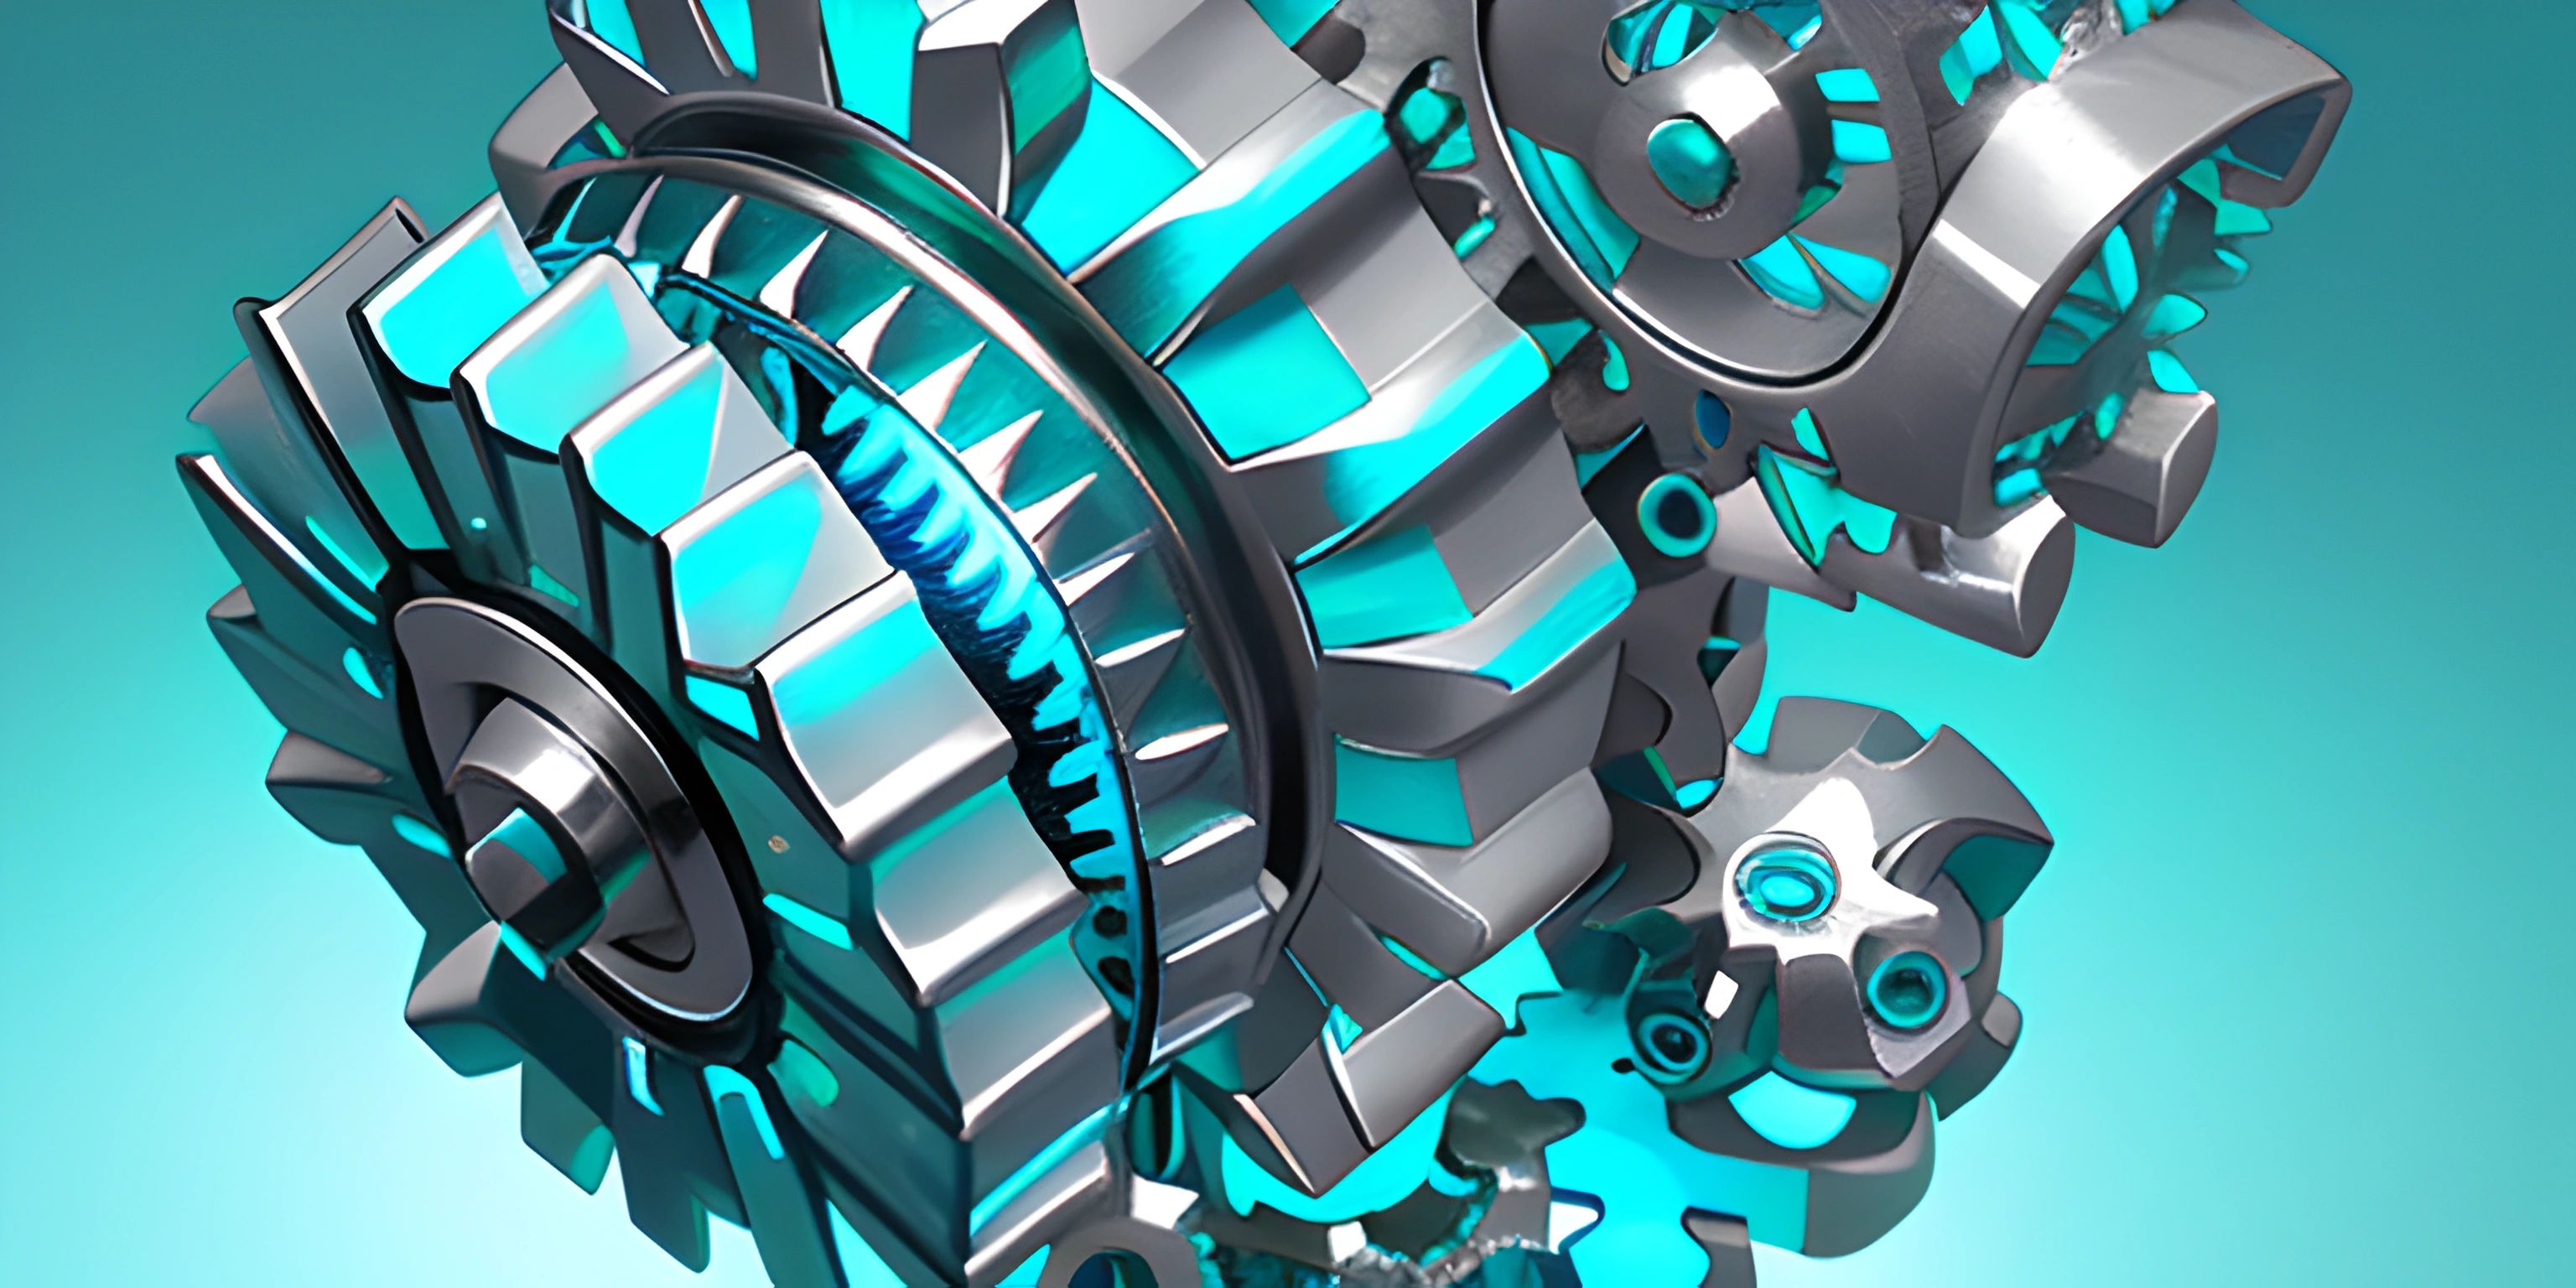 some gears and wheels that are all very shiny and metallicy metal elements and 3d images